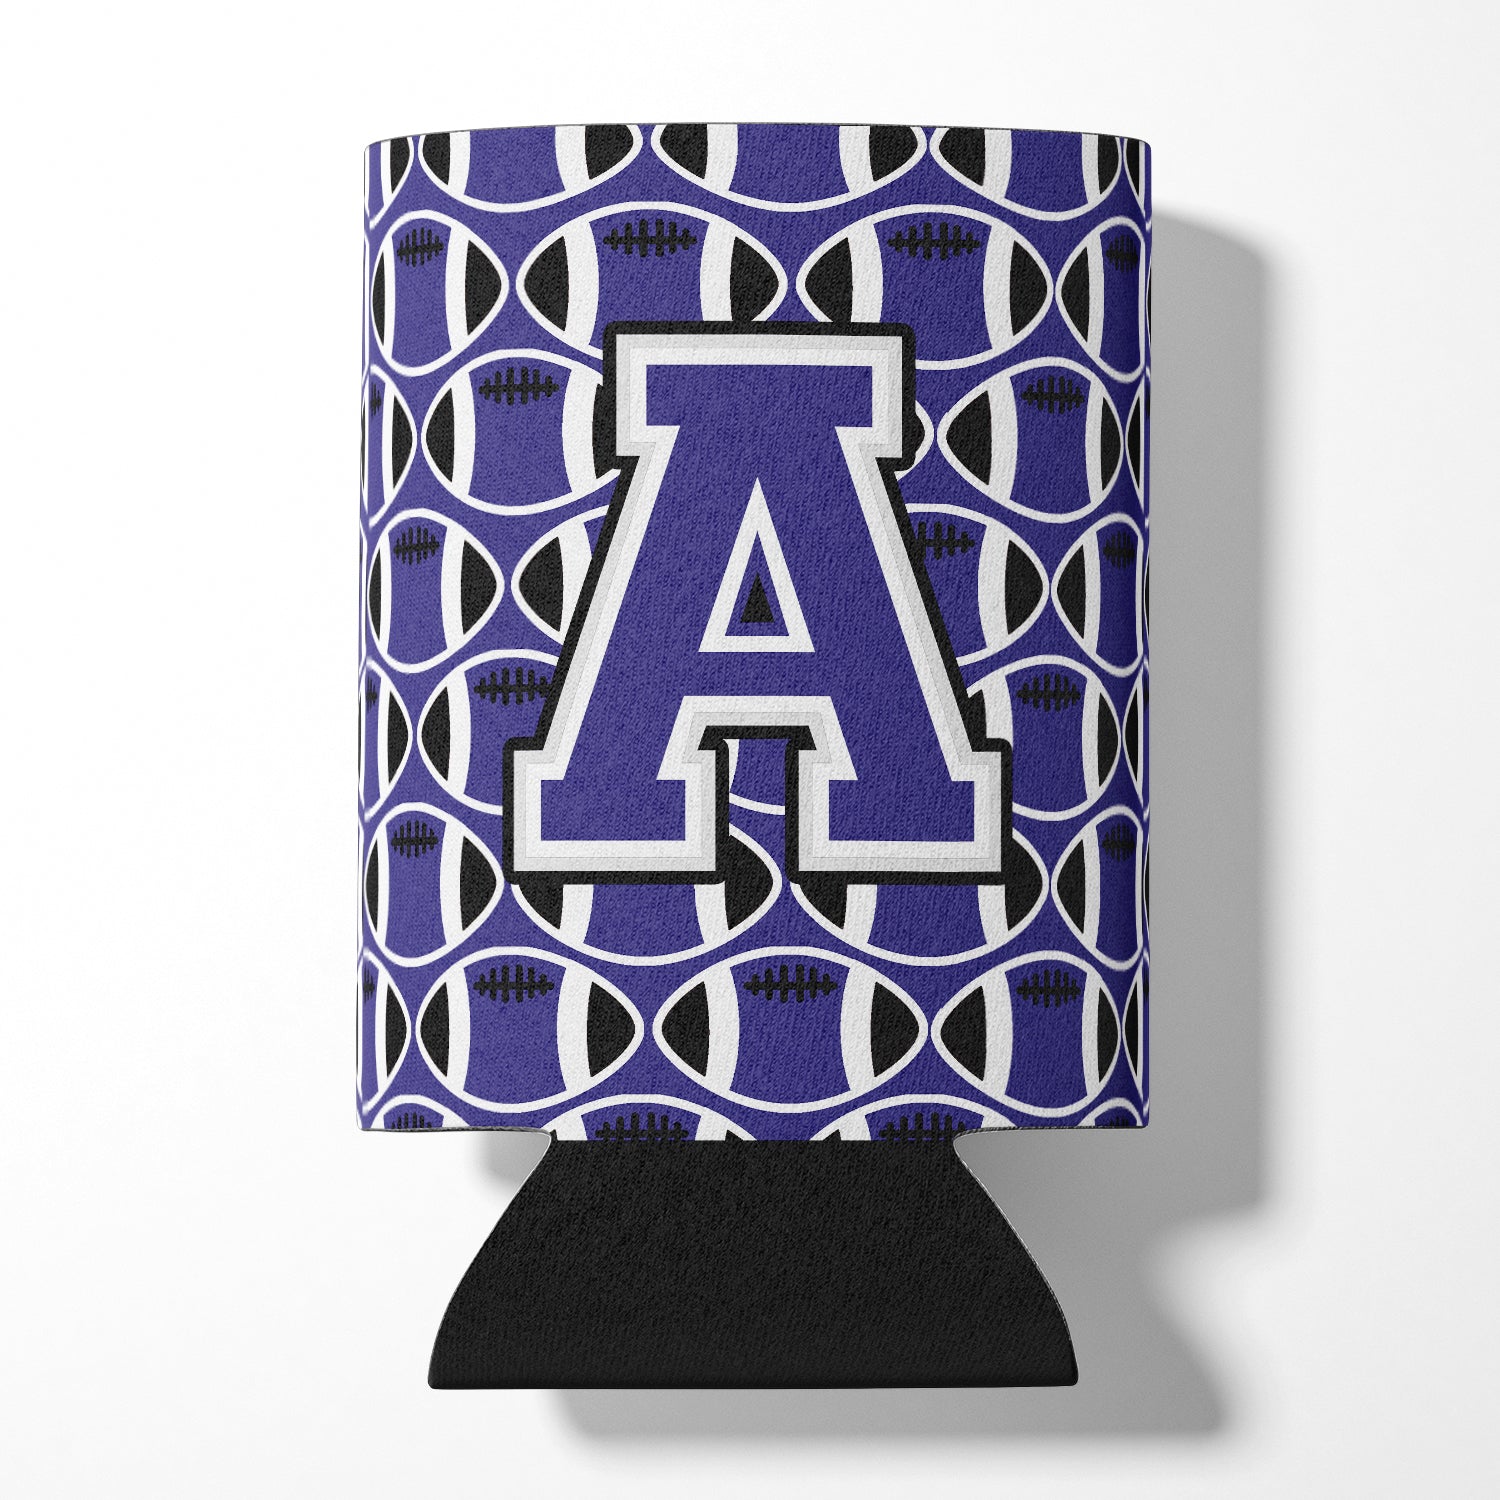 Letter A Football Purple and White Can or Bottle Hugger CJ1068-ACC.